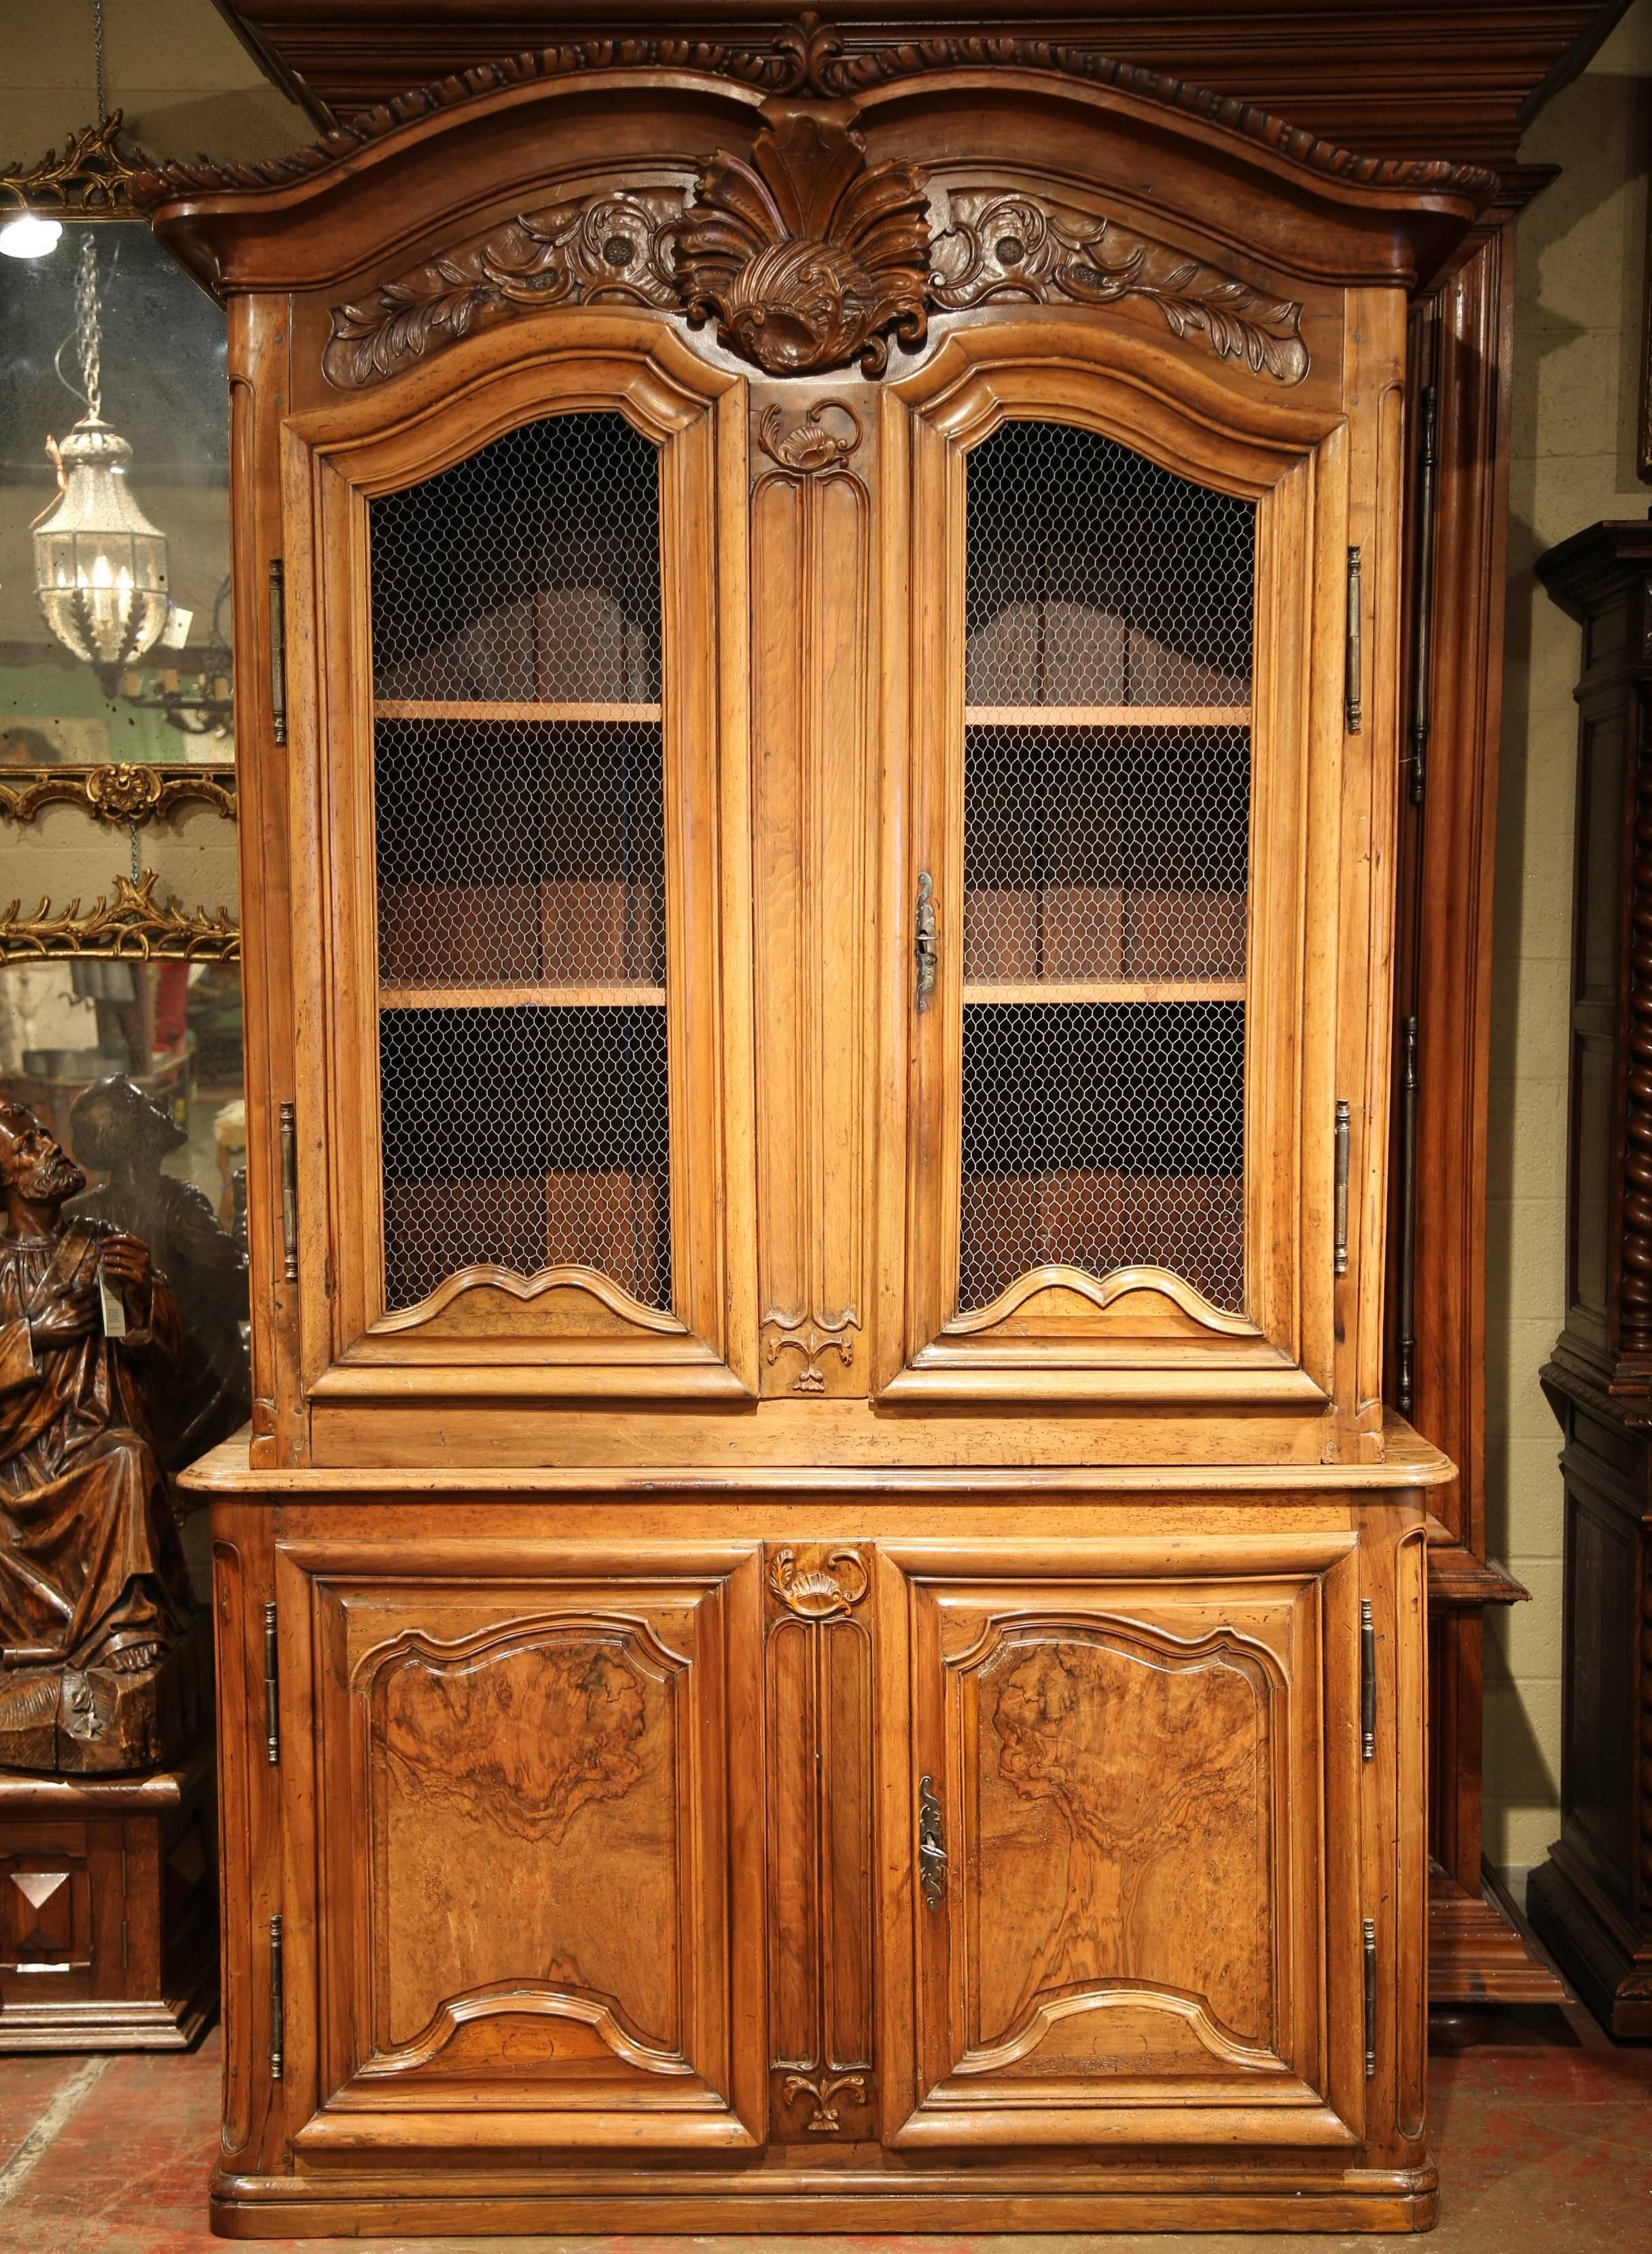 Régence 18th Century French Carved Walnut Buffet Deux Corps with Chicken Wire Doors